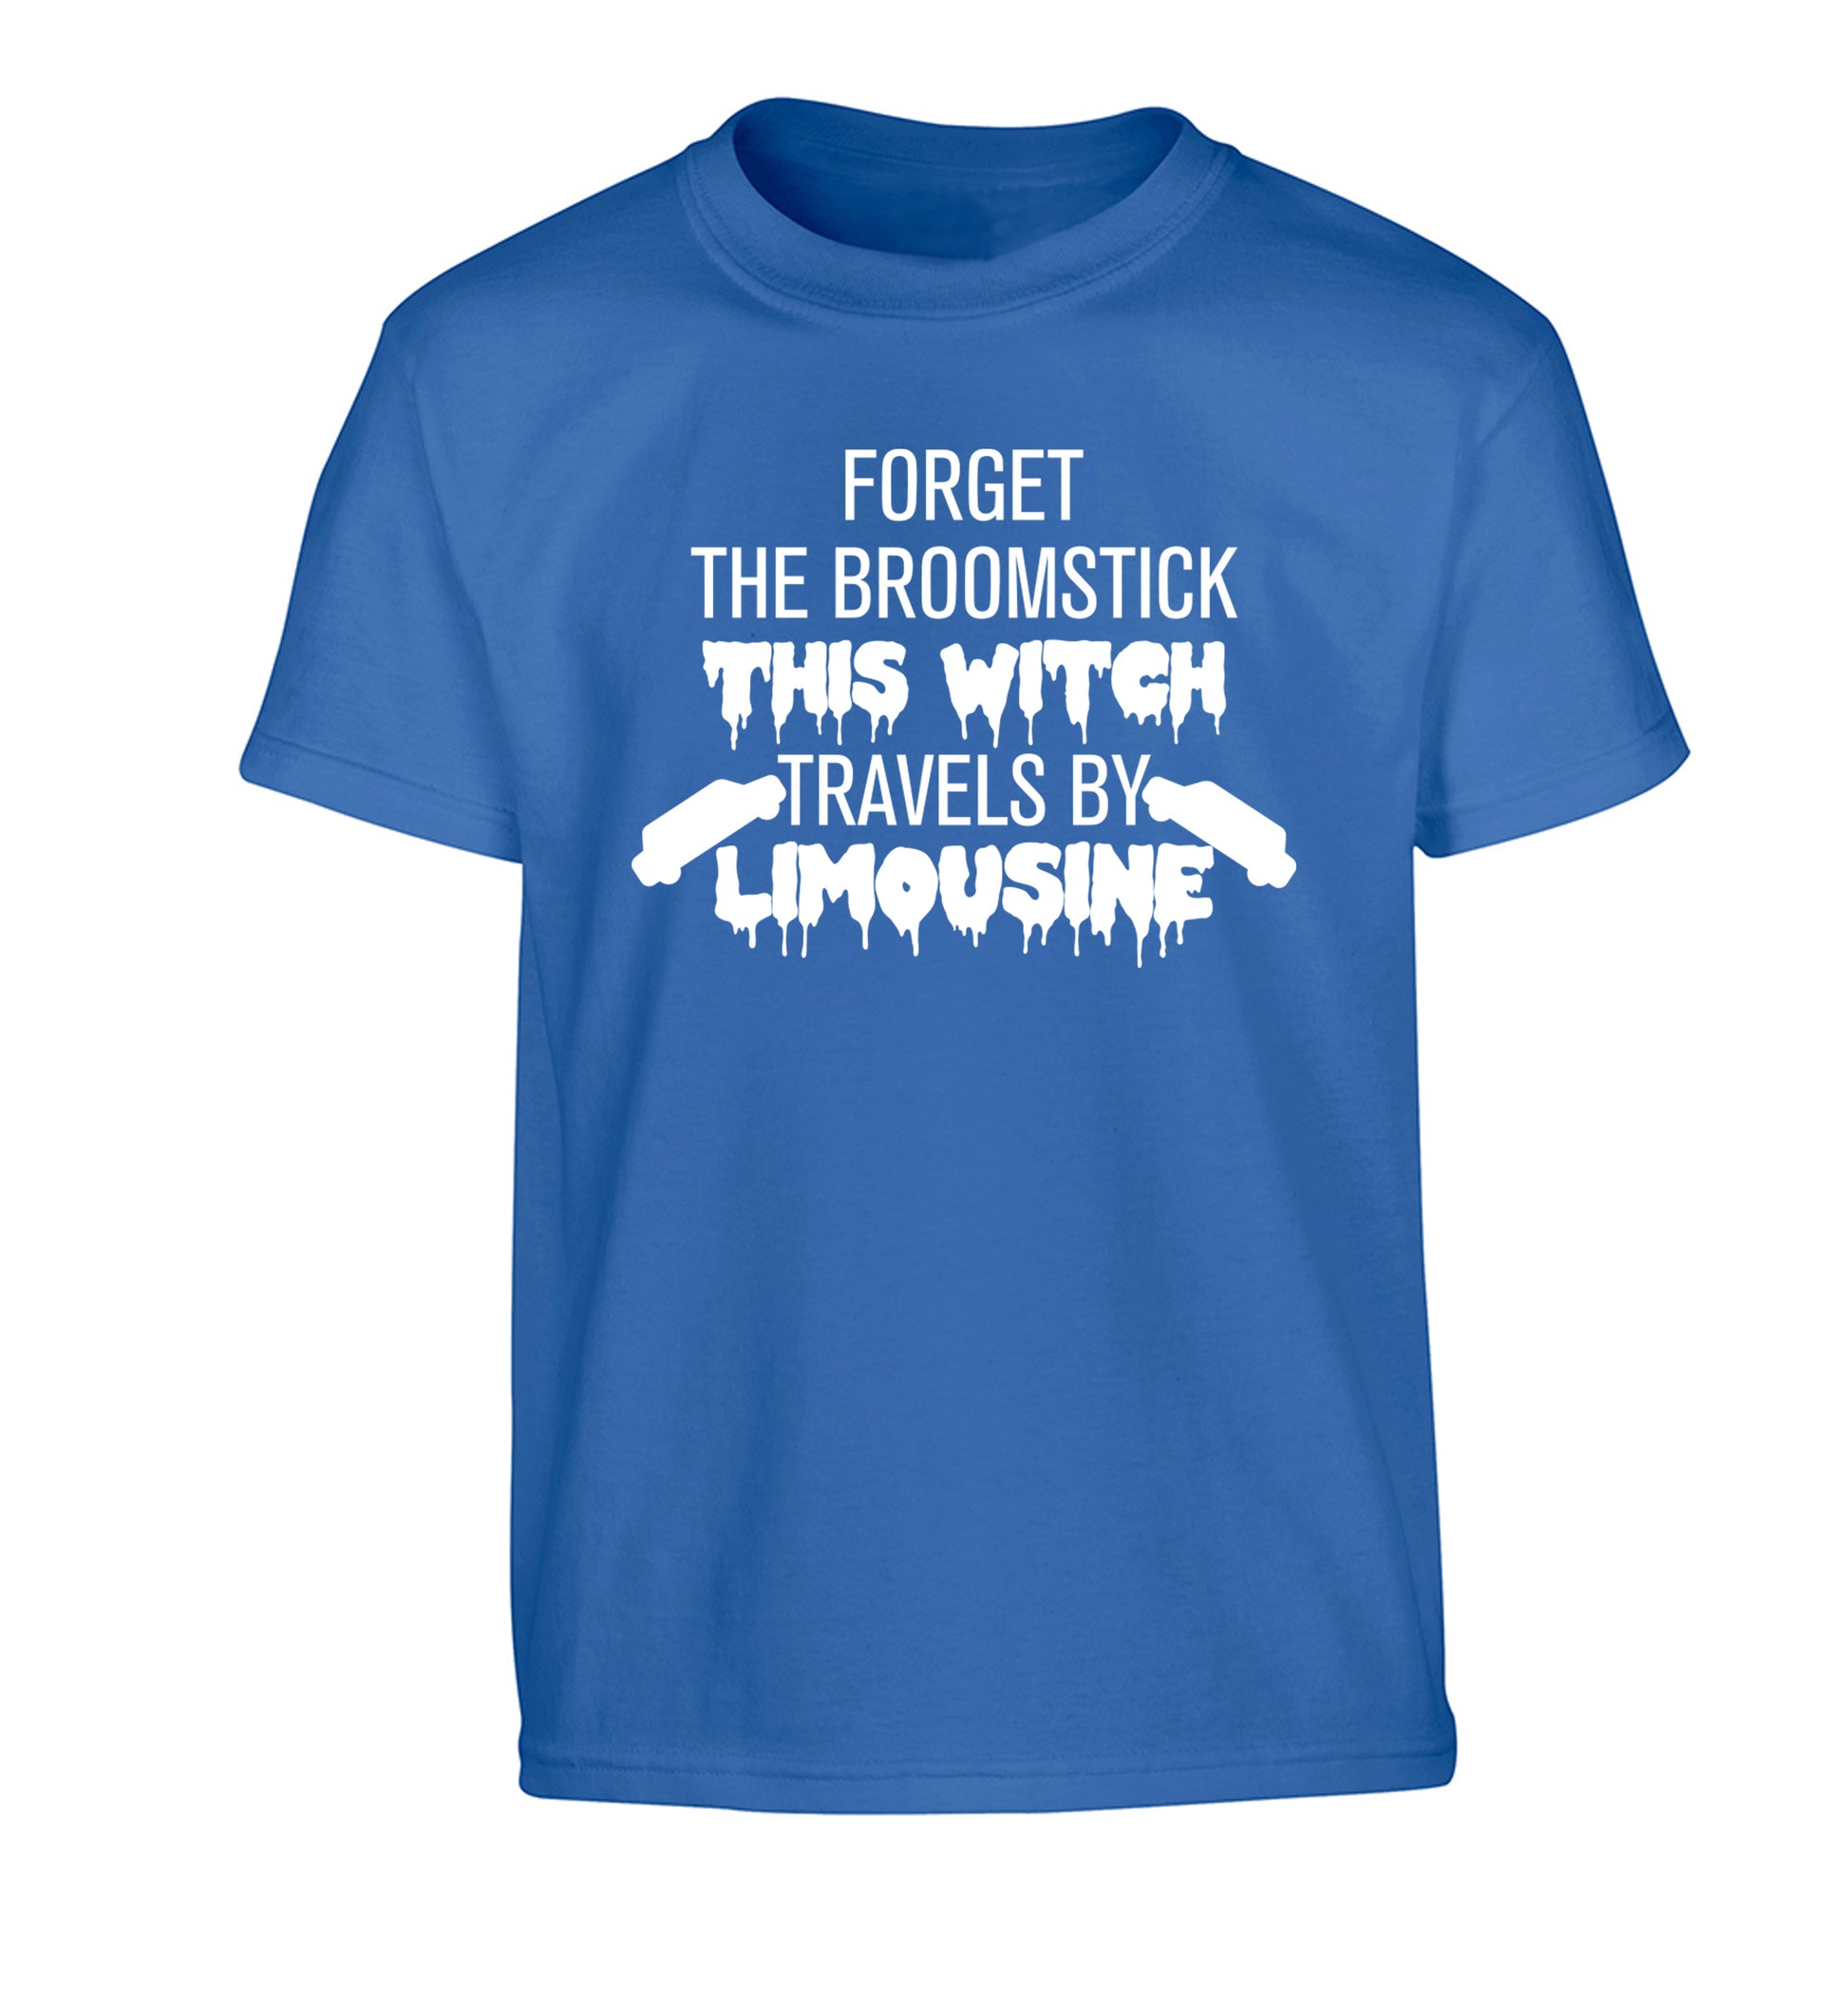 Forget the broomstick this witch travels by limousine Children's blue Tshirt 12-14 Years